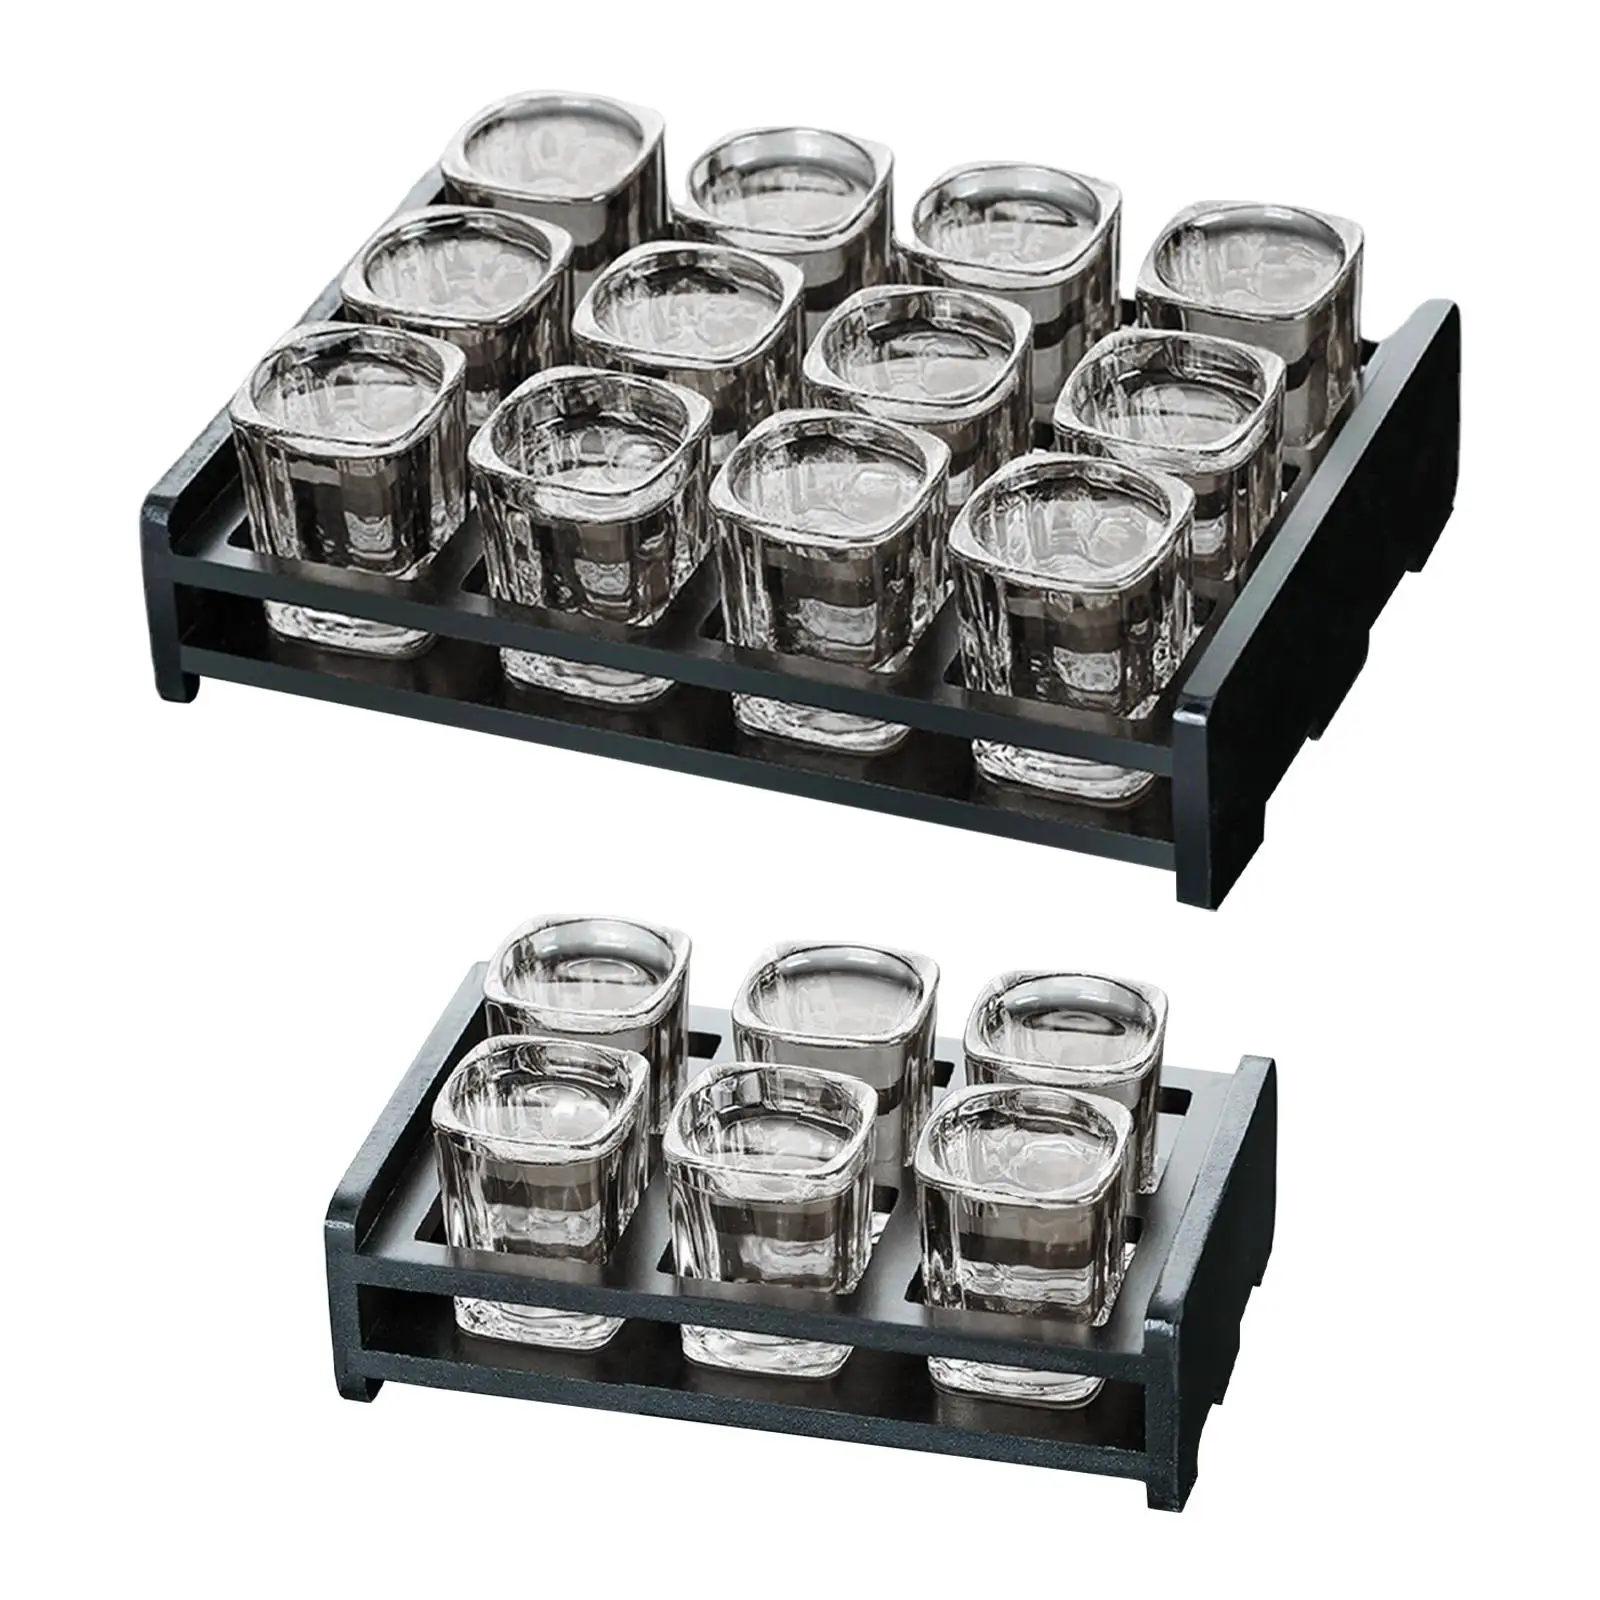 Beer Glass Tray Pub Organizer Serving Home for Party Metal Storage Wood Serving Tray for Bar with Glass Cups Glass Holder Tray